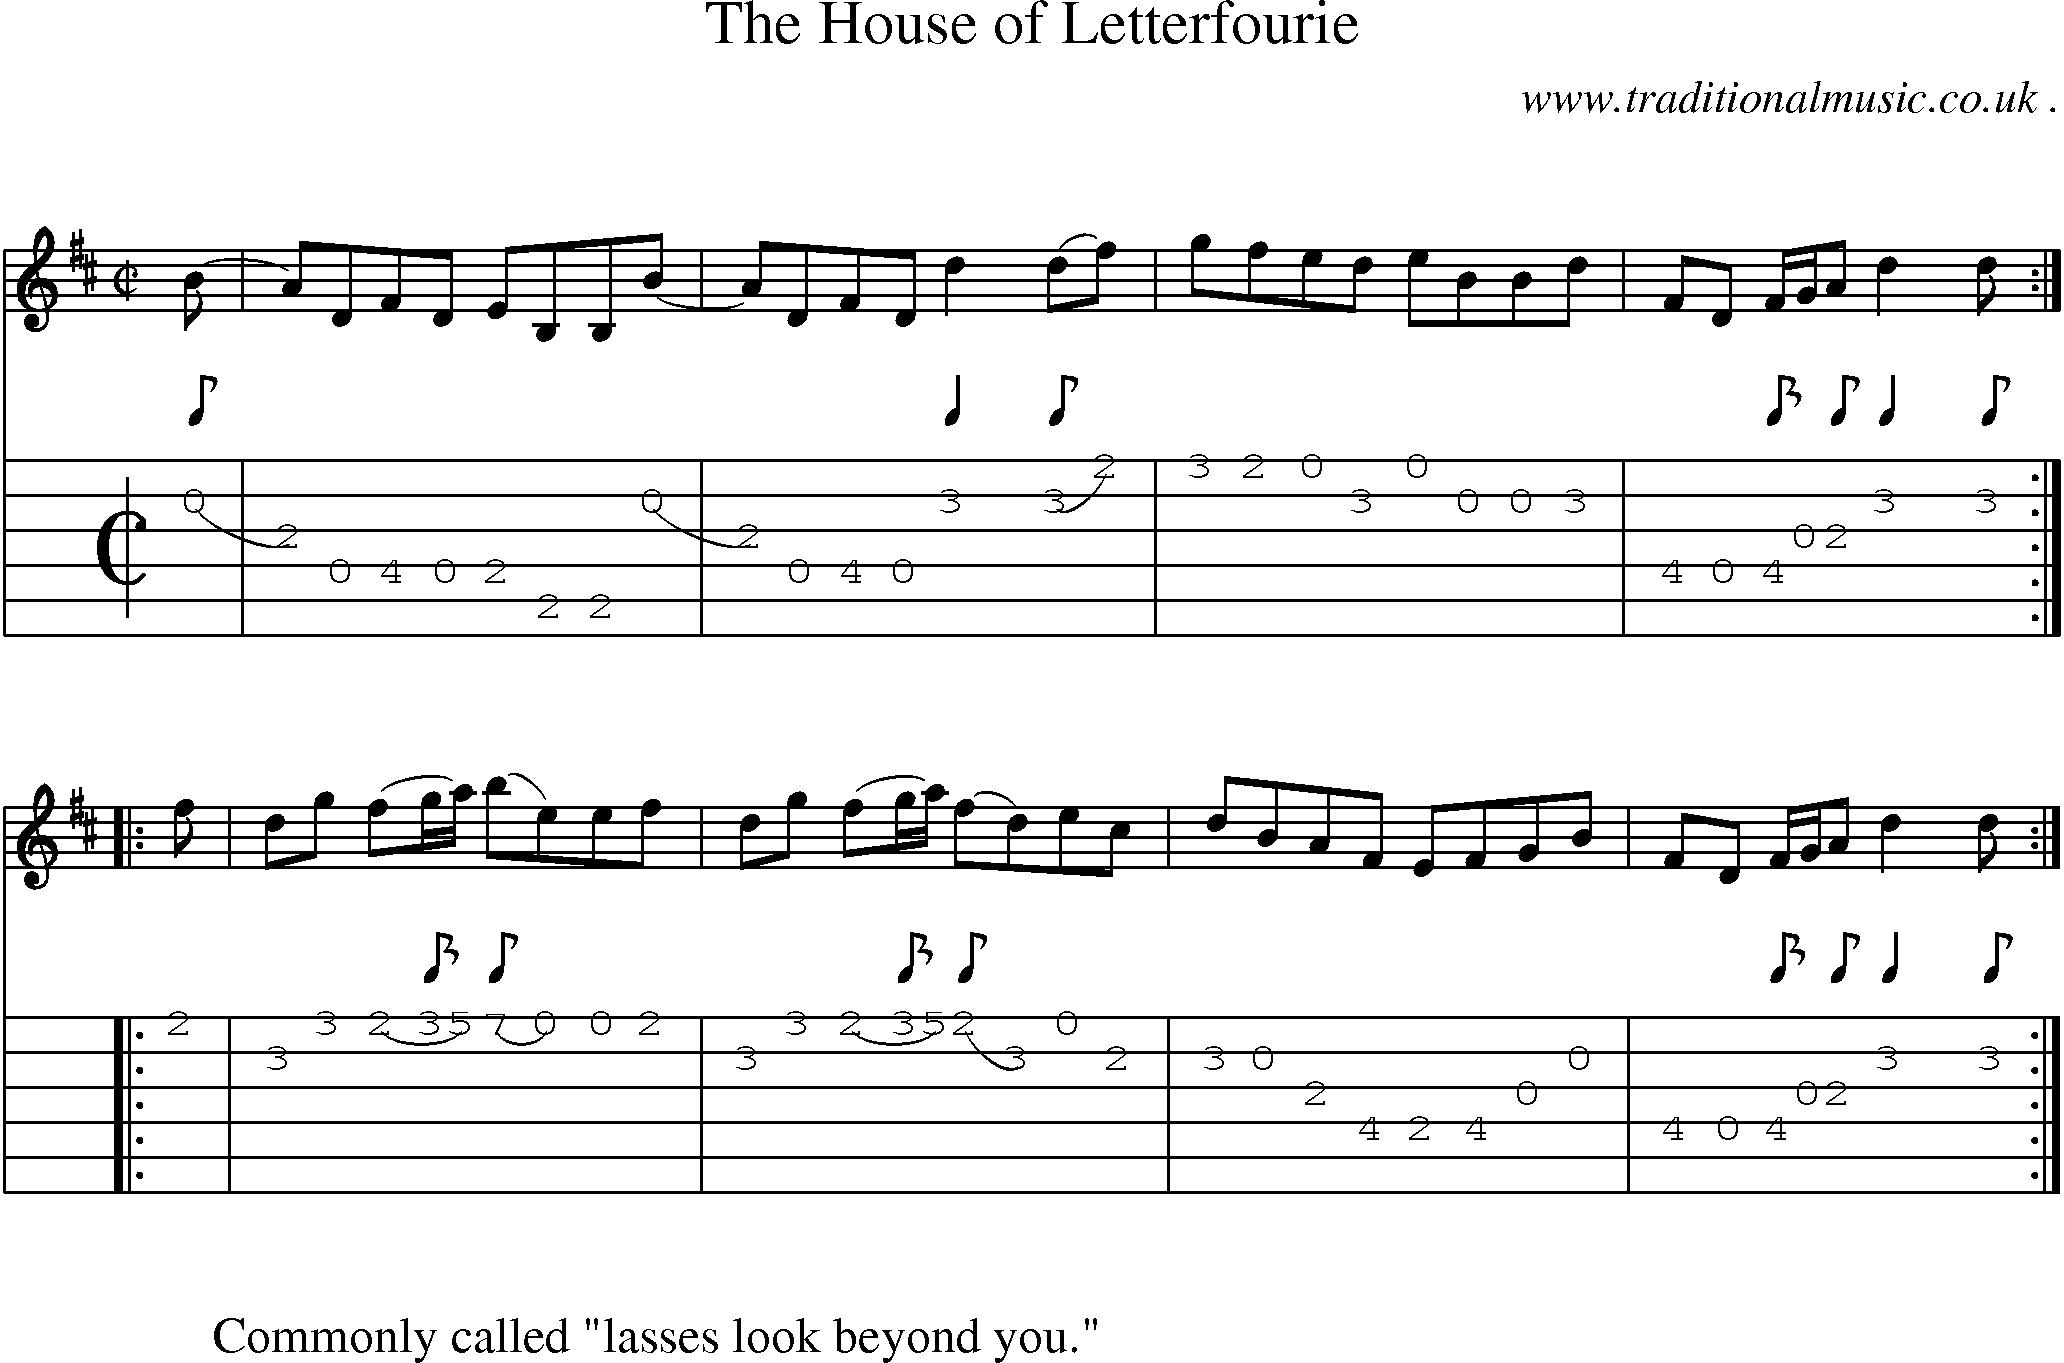 Sheet-music  score, Chords and Guitar Tabs for The House Of Letterfourie